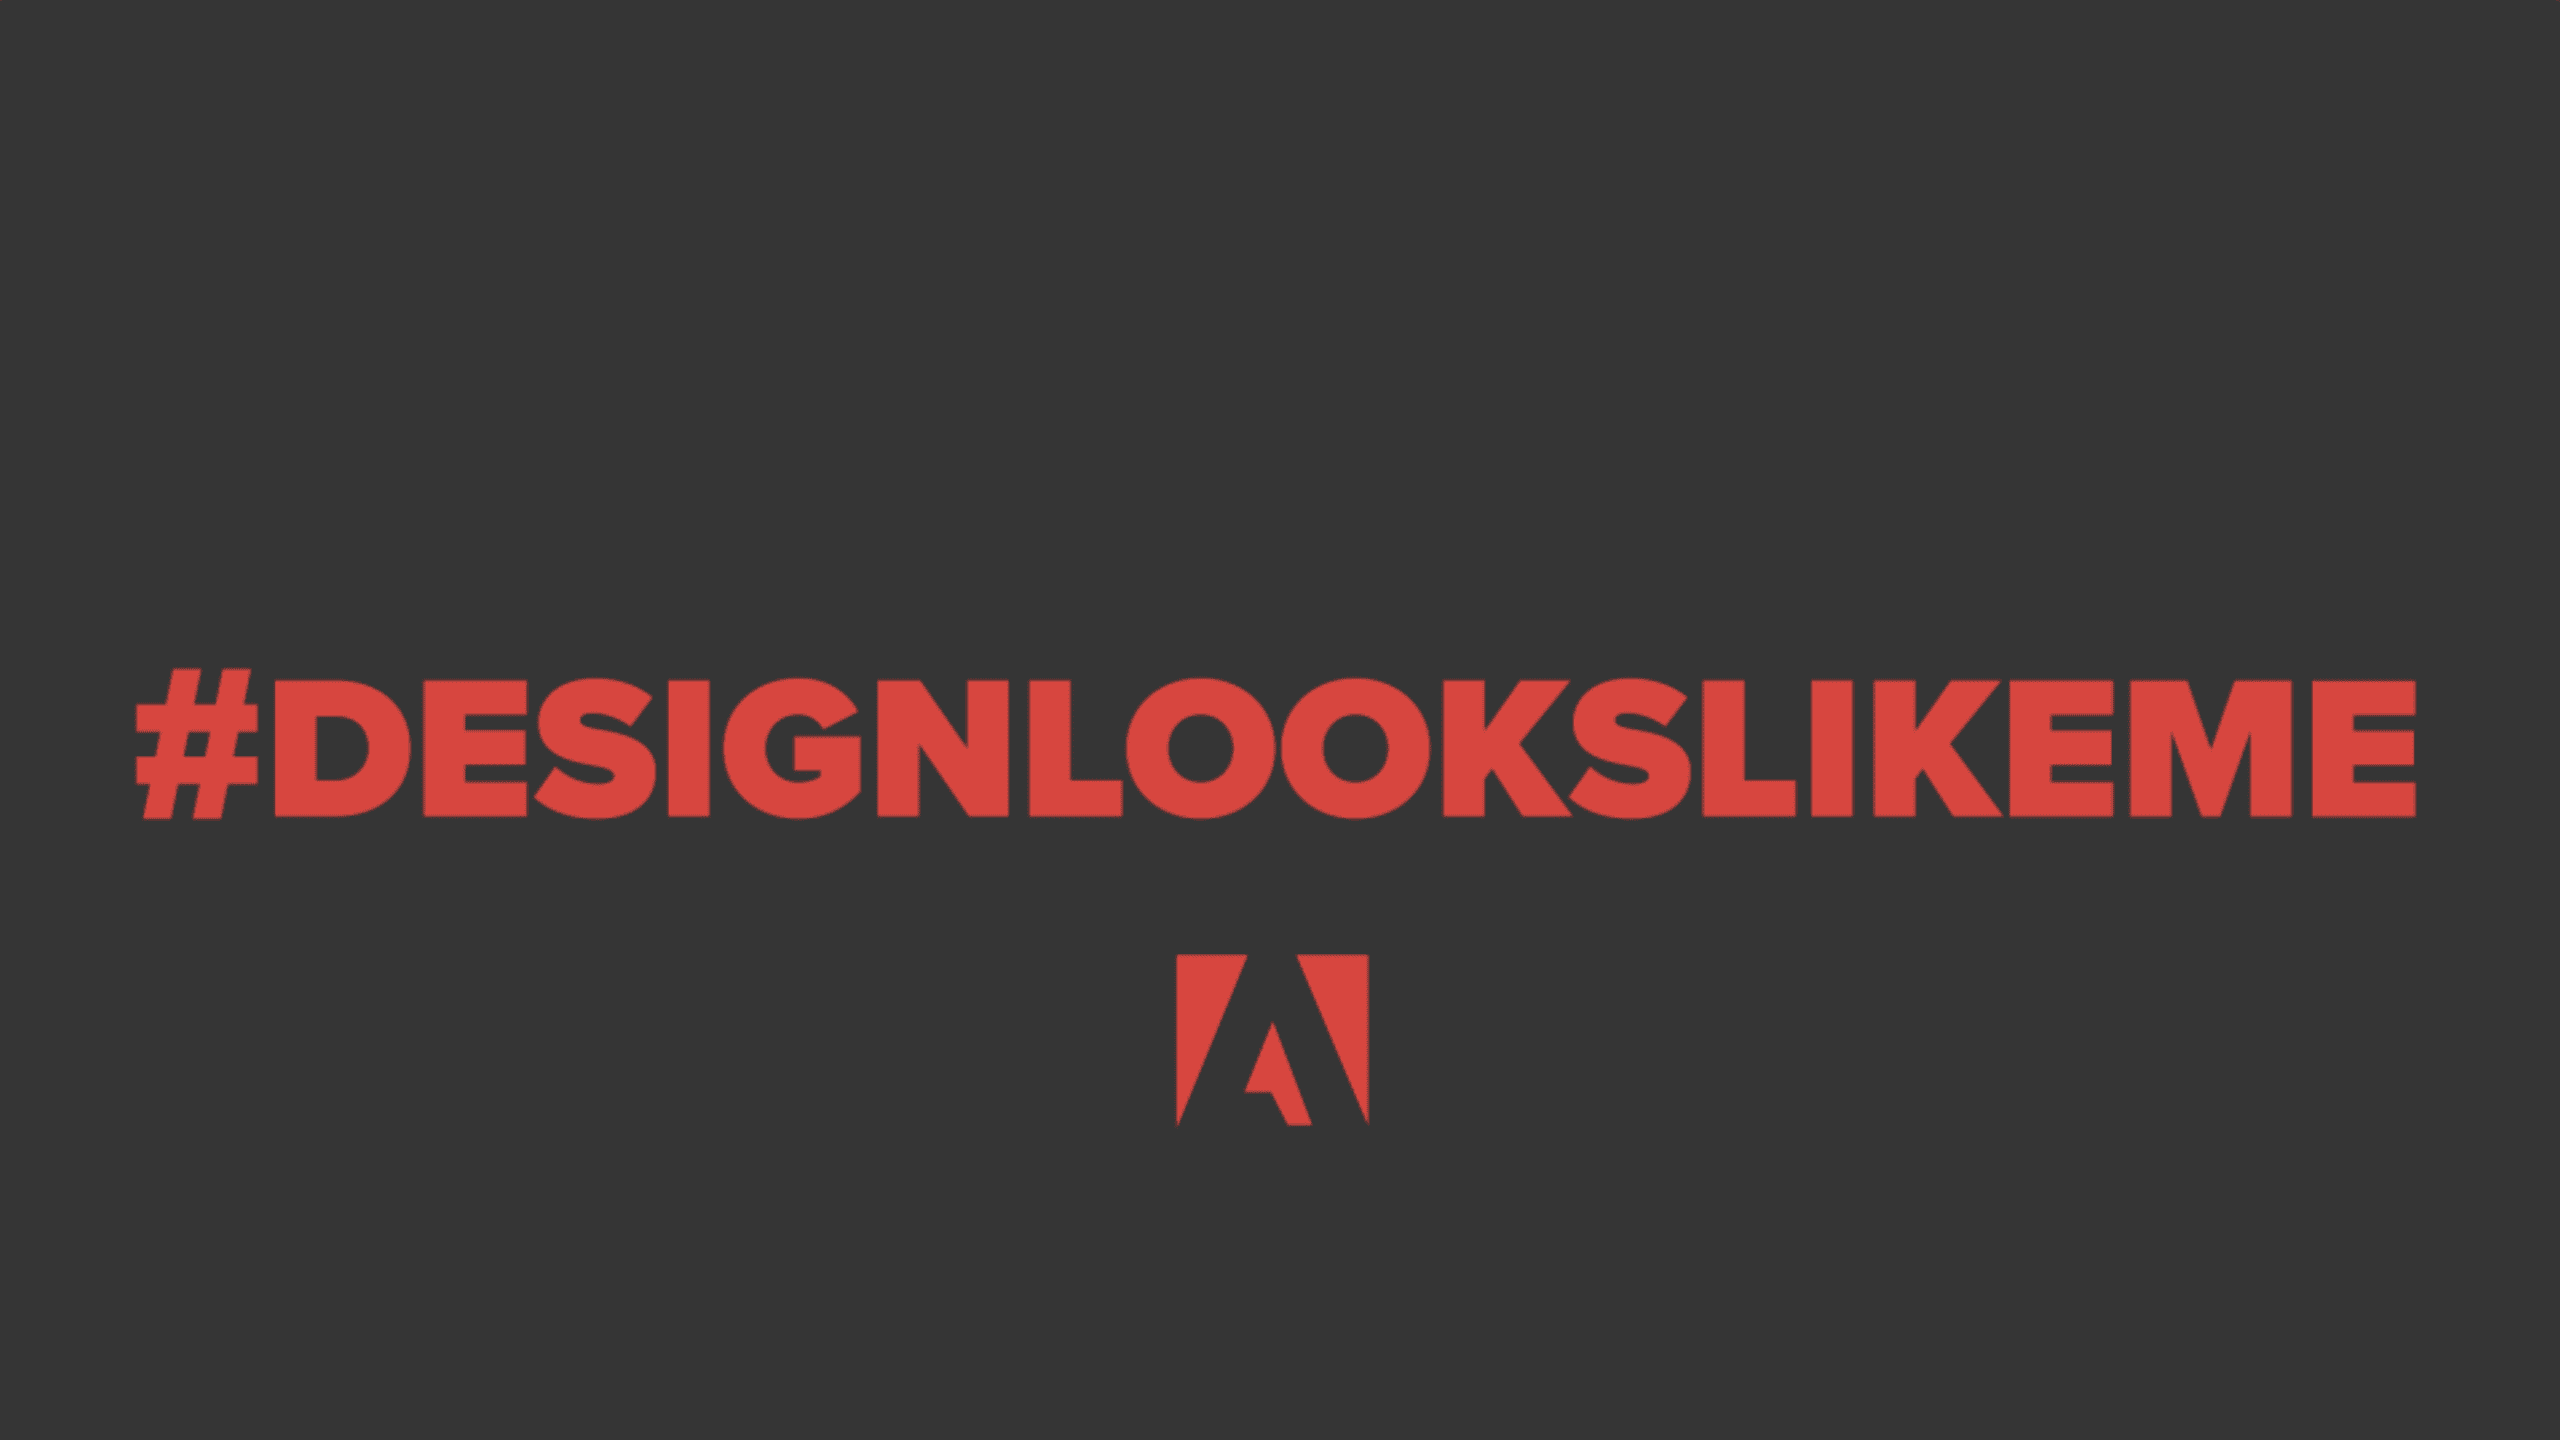 Bold red text that reads "# Design Looks Like Me" against a grey background. Below the text is a red Adobe logo.